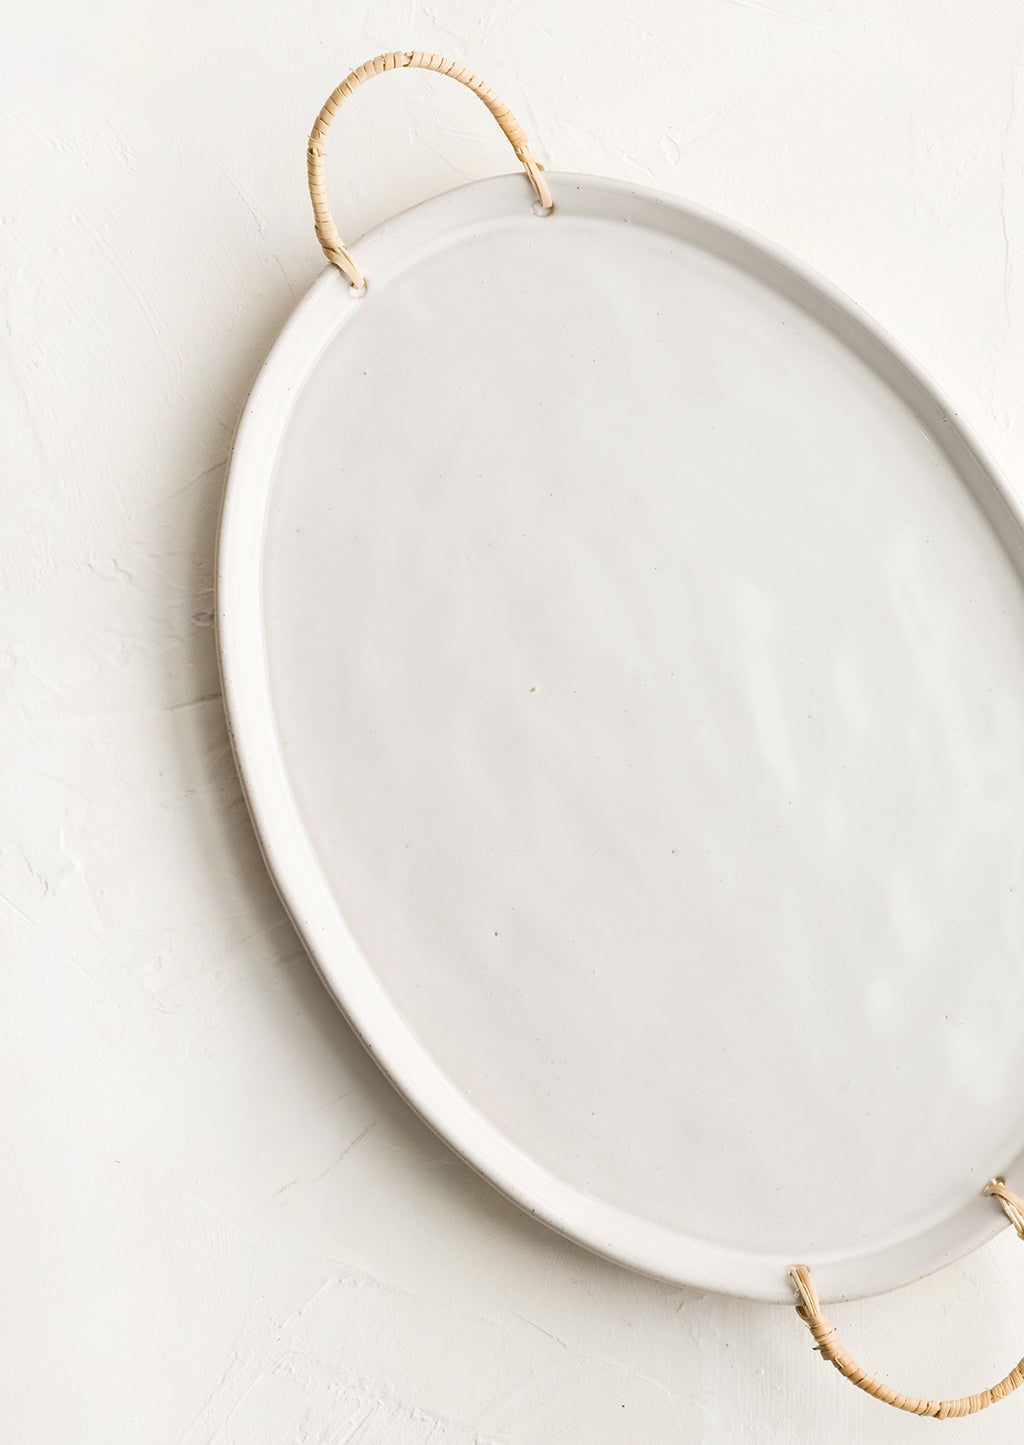 2: A glossy white ceramic platter in oval shape with rattan wrapped handles at sides.